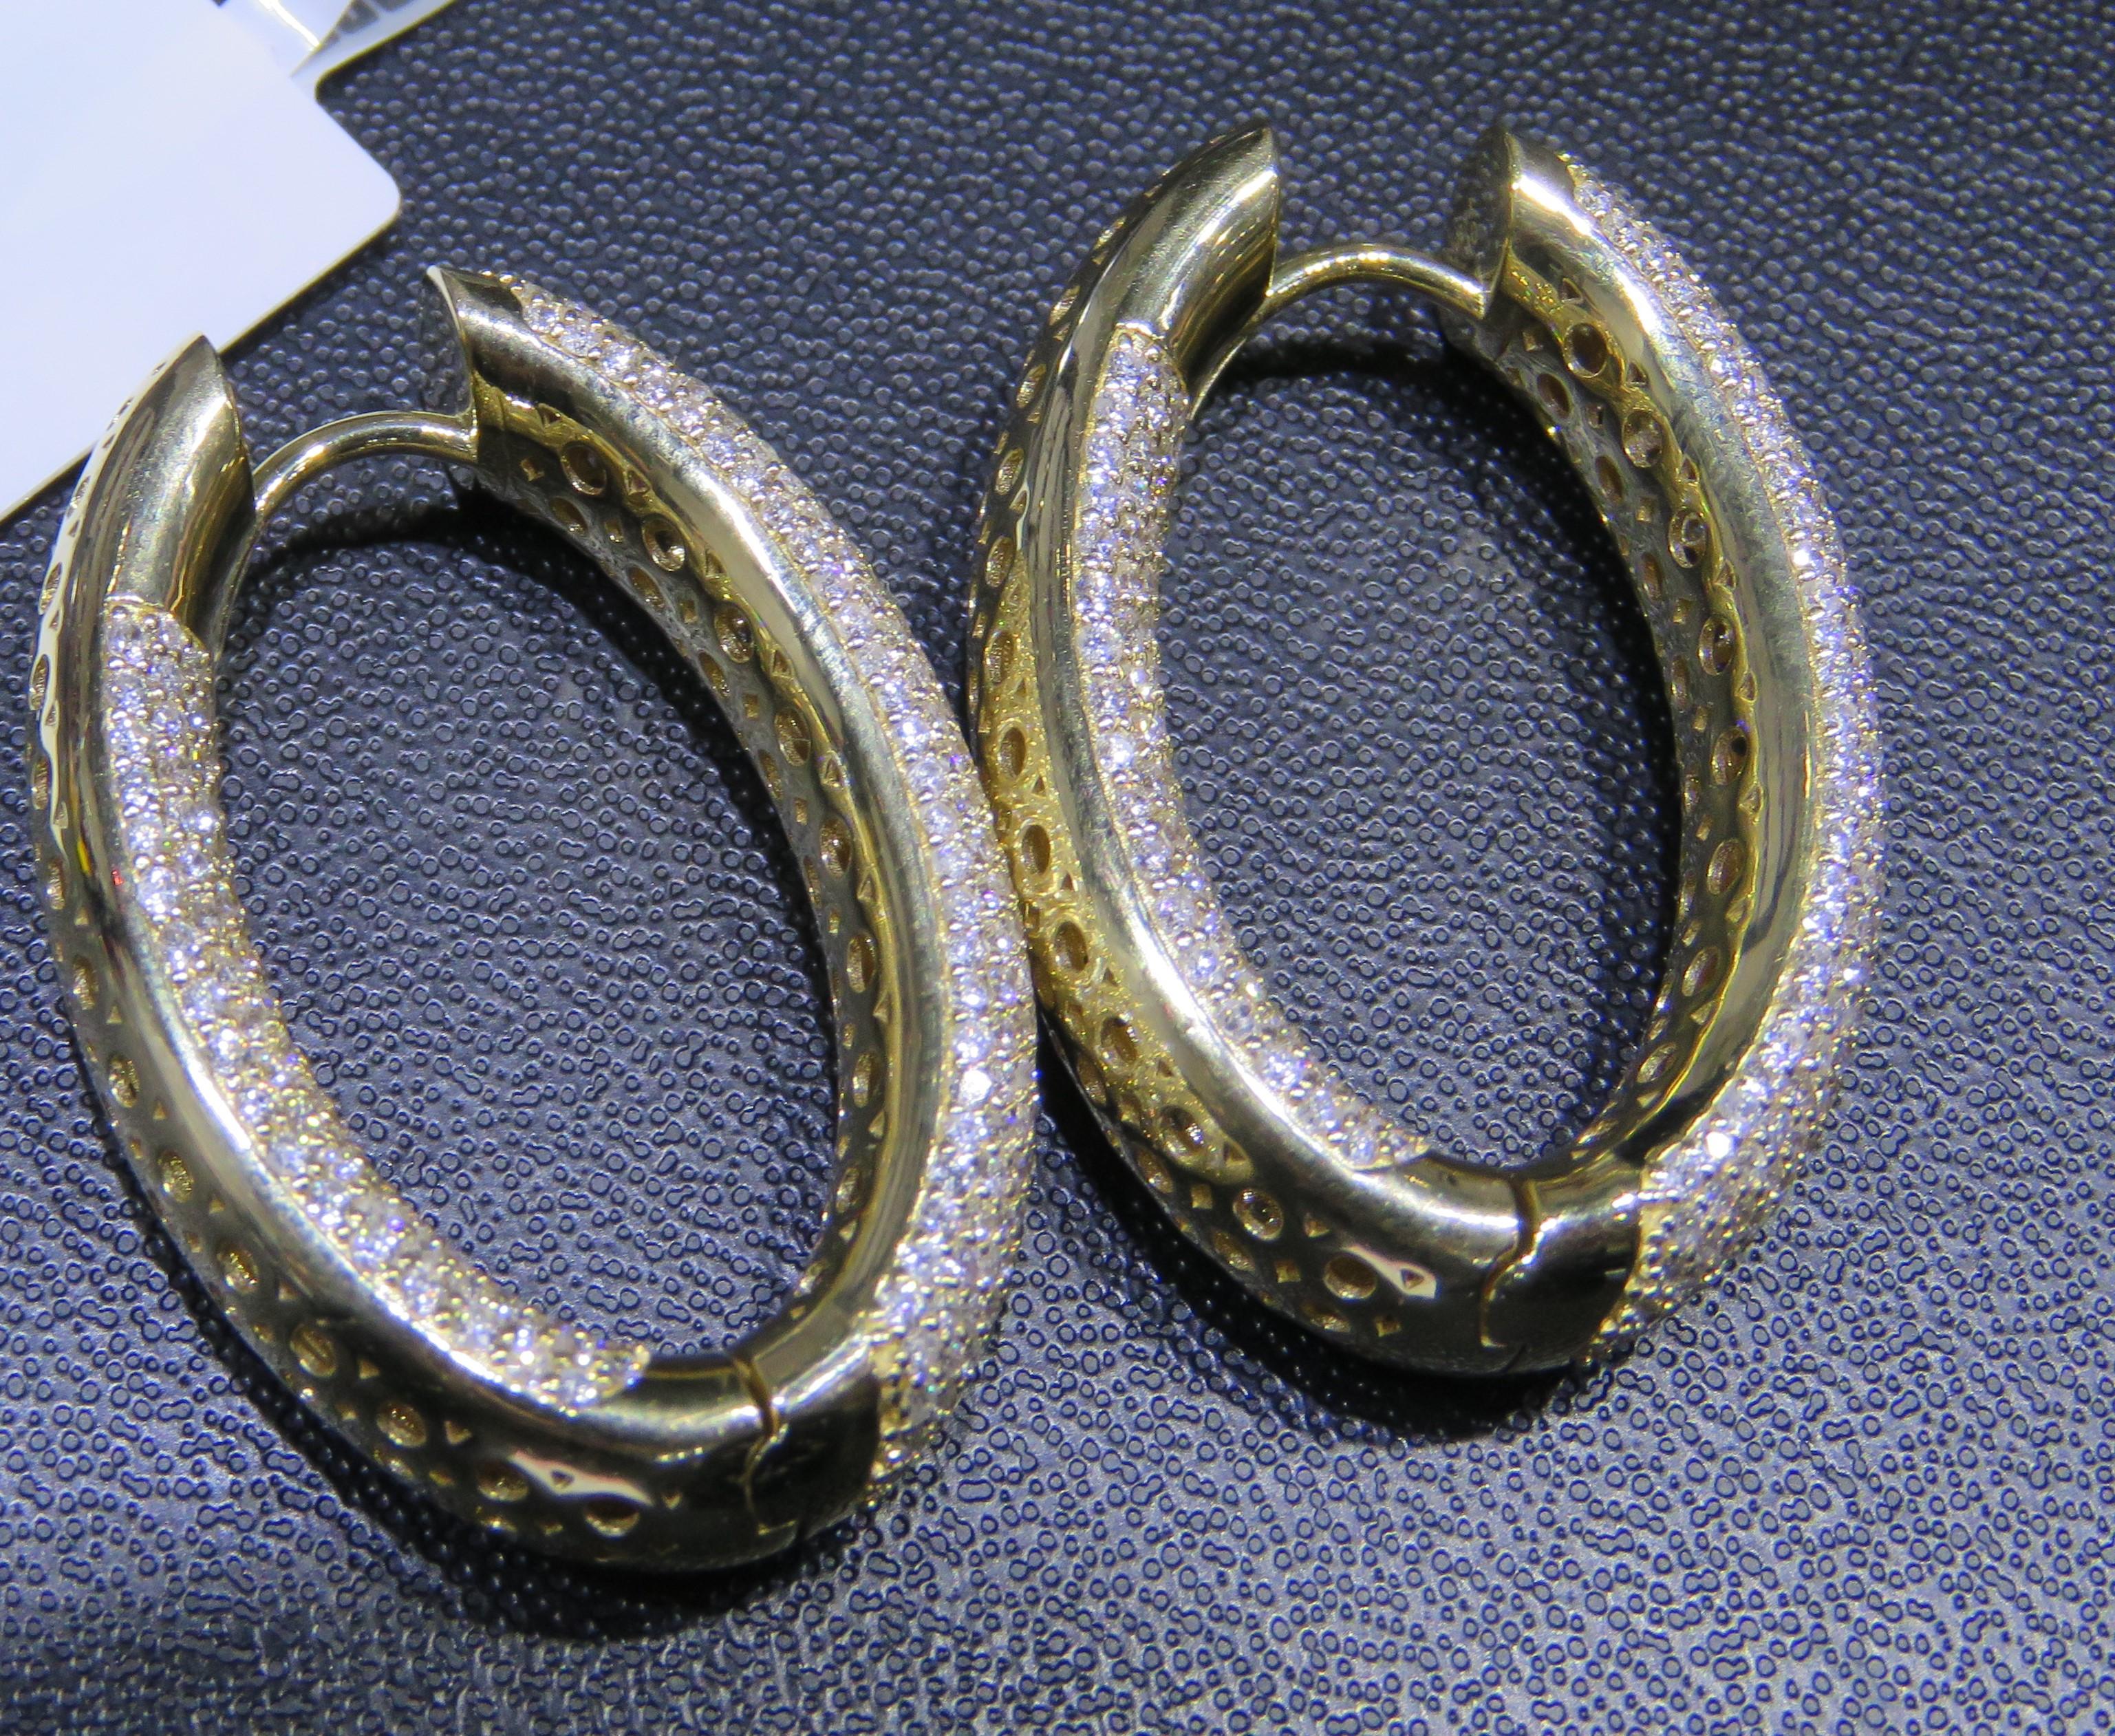 The Following Items we are offering is this Rare Important Radiant 18KT Yellow Gold Gorgeous Glittering and Sparkling Magnificent Fancy Diamond Hoop Earrings. Earrings contain approx 5.50CTS of Beautiful Fancy Diamonds!!! Stones are Very Clean and